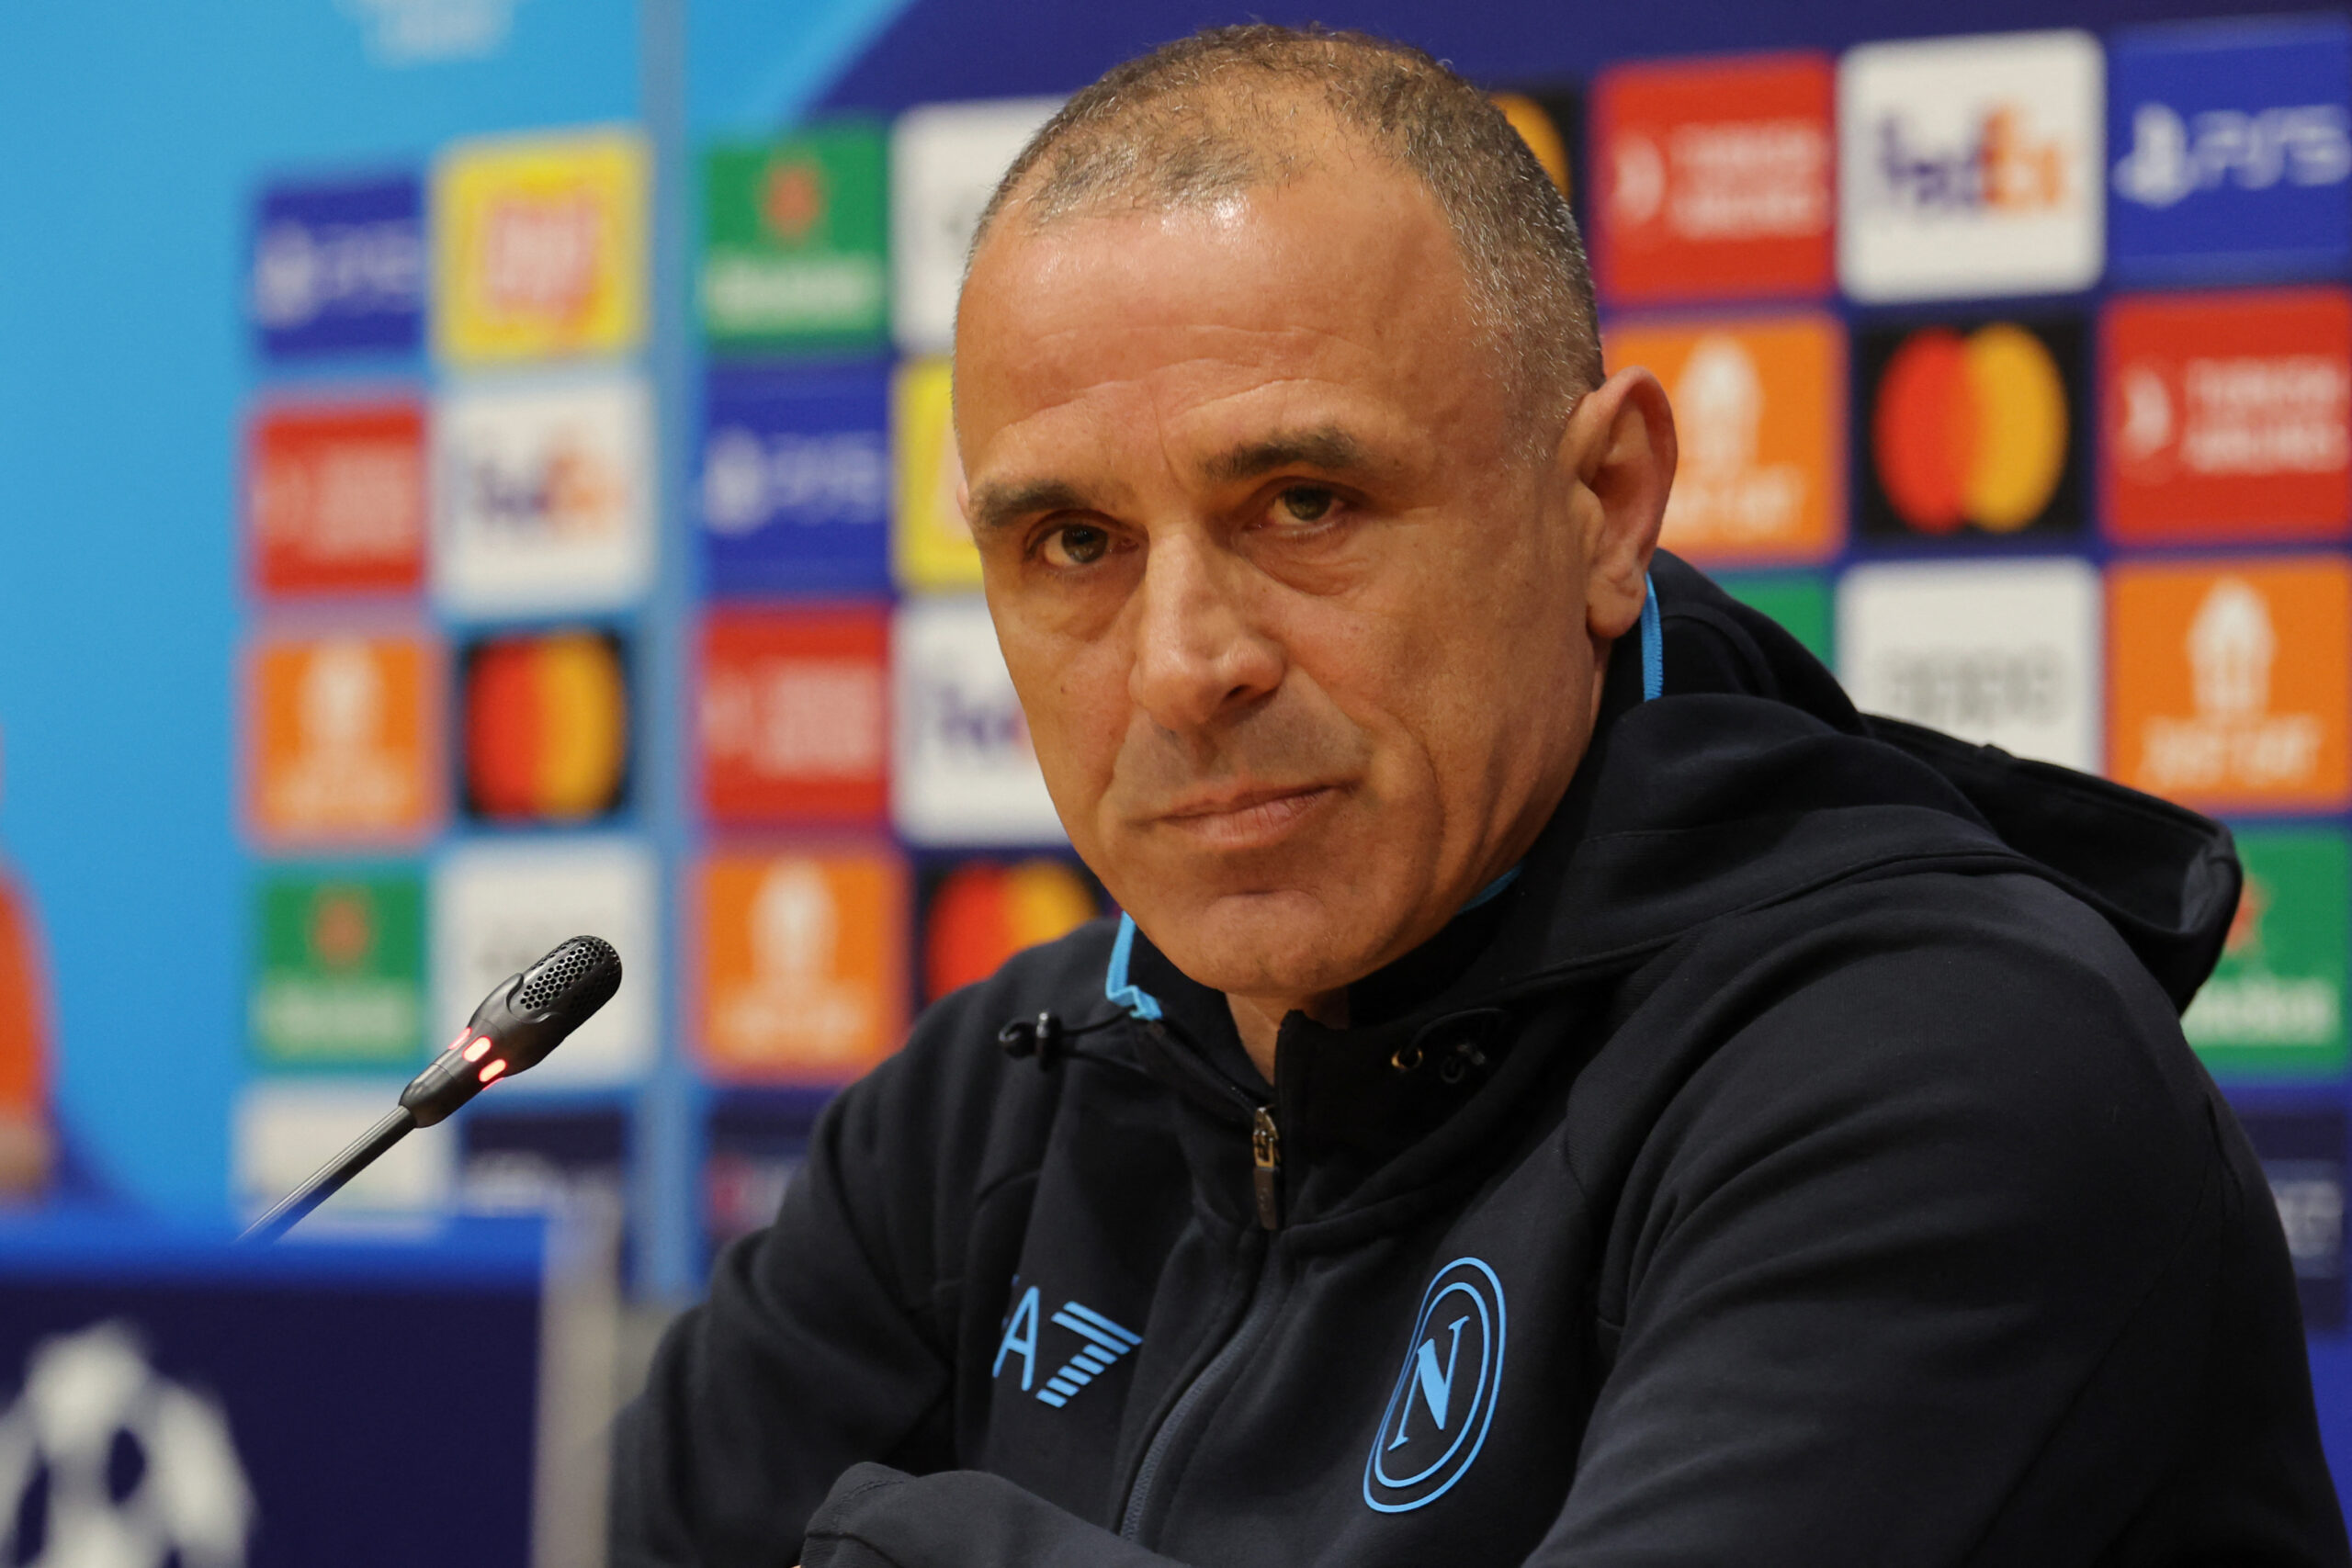 Napoli's Italian headcoach Francesco Calzona addresses a press conference on the eve of their UEFA Champions League last 16 second leg football match against FC Barcelona at the Estadi Olimpic Lluis Companys in Barcelona on March 11, 2024.